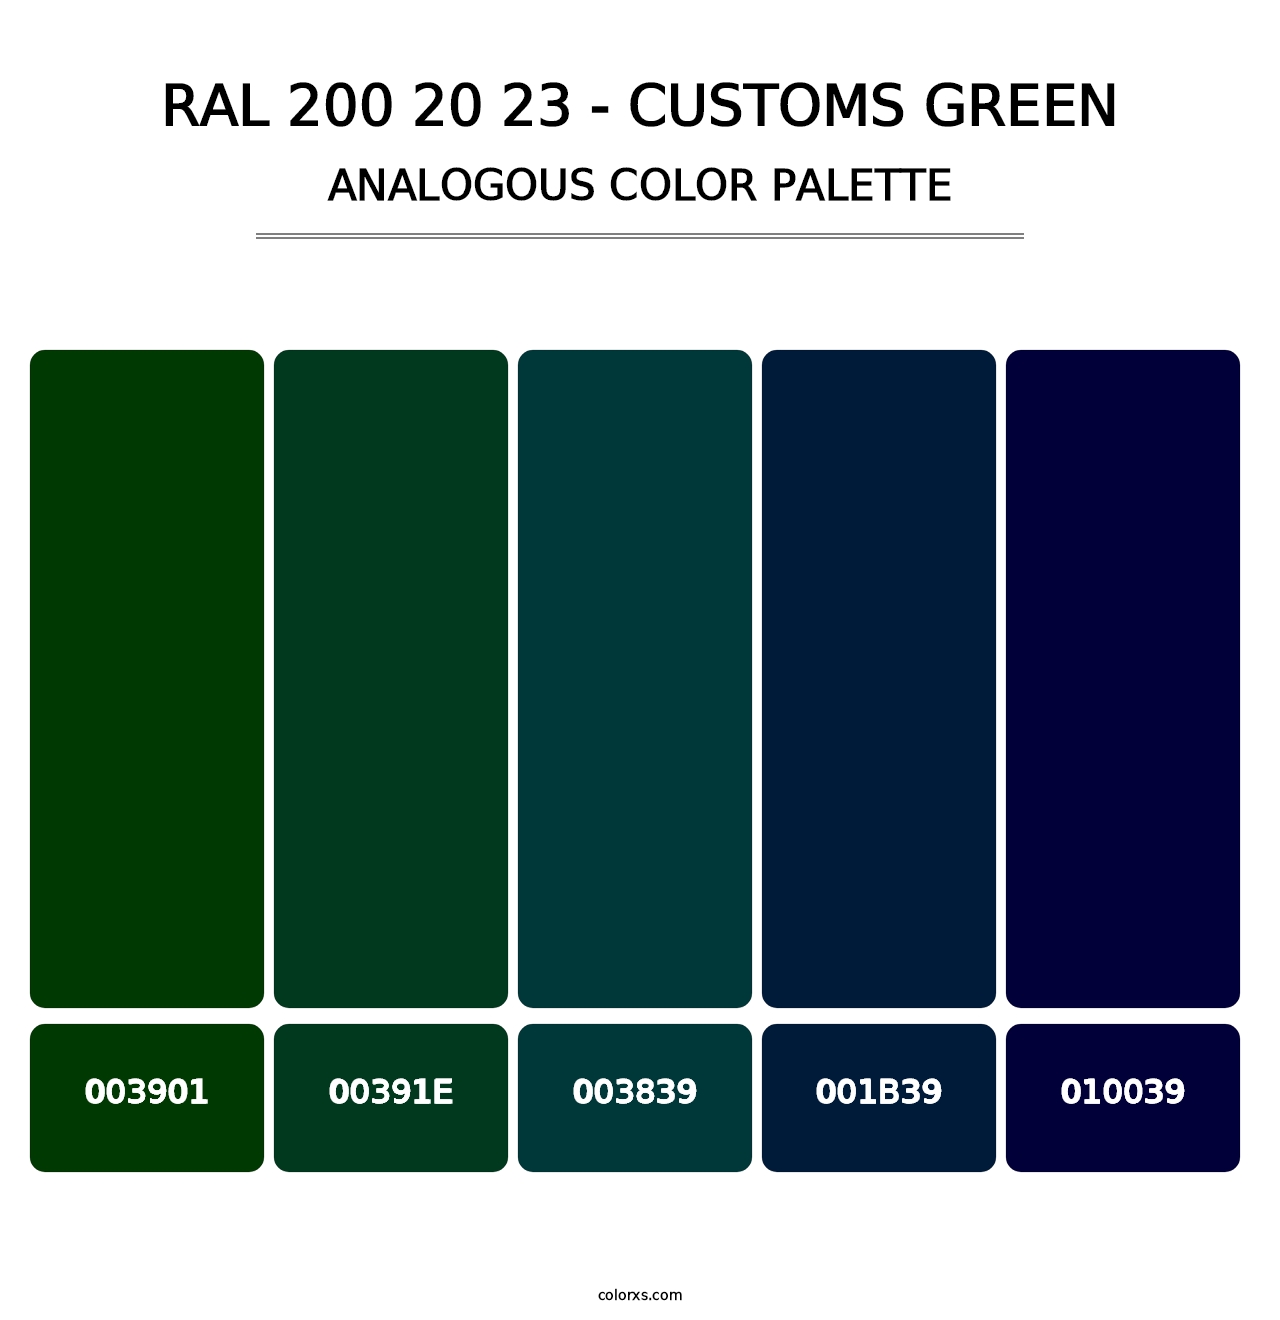 RAL 200 20 23 - Customs Green - Analogous Color Palette